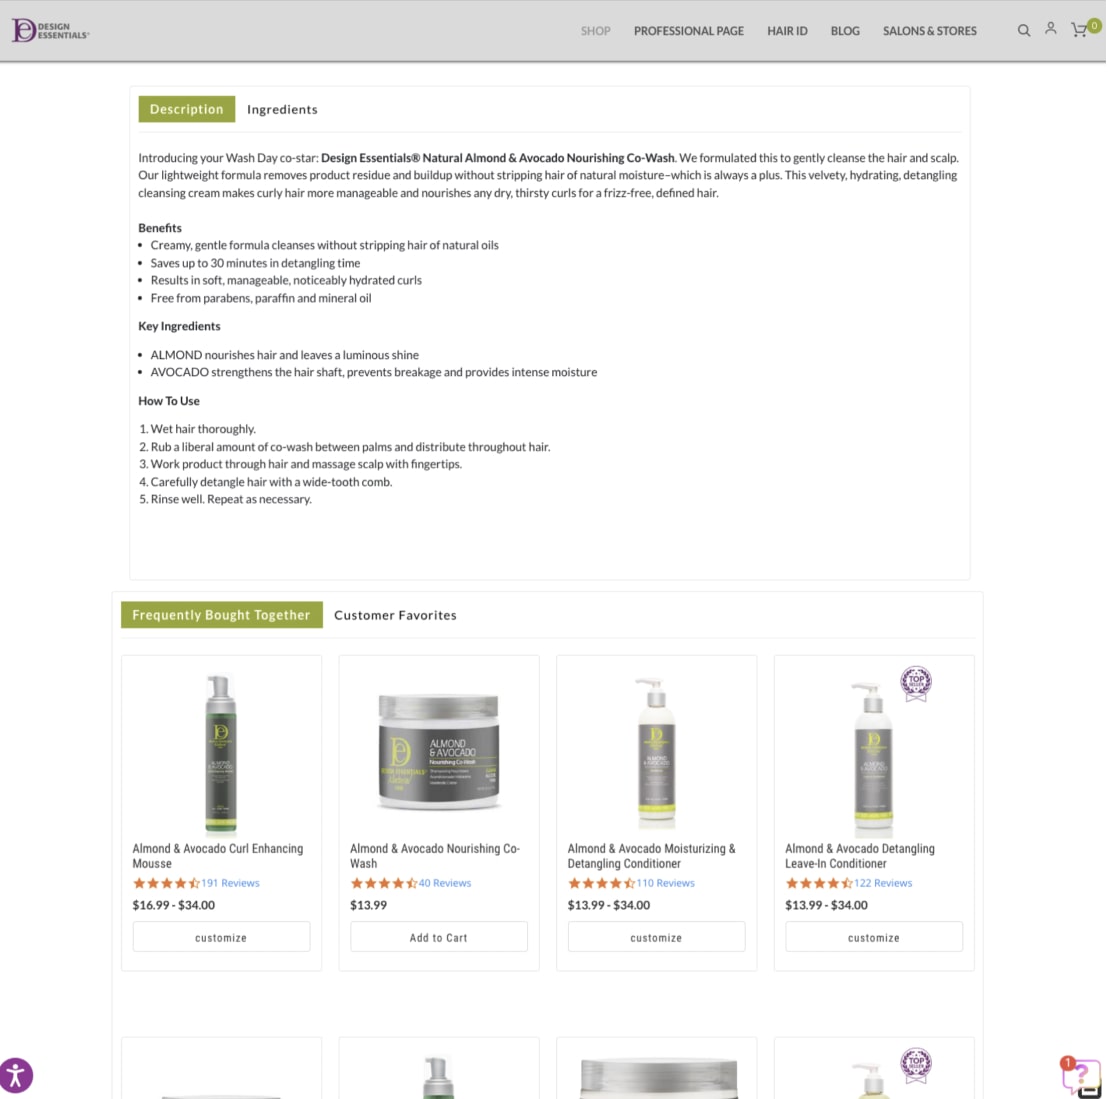 Why is product page content so important?